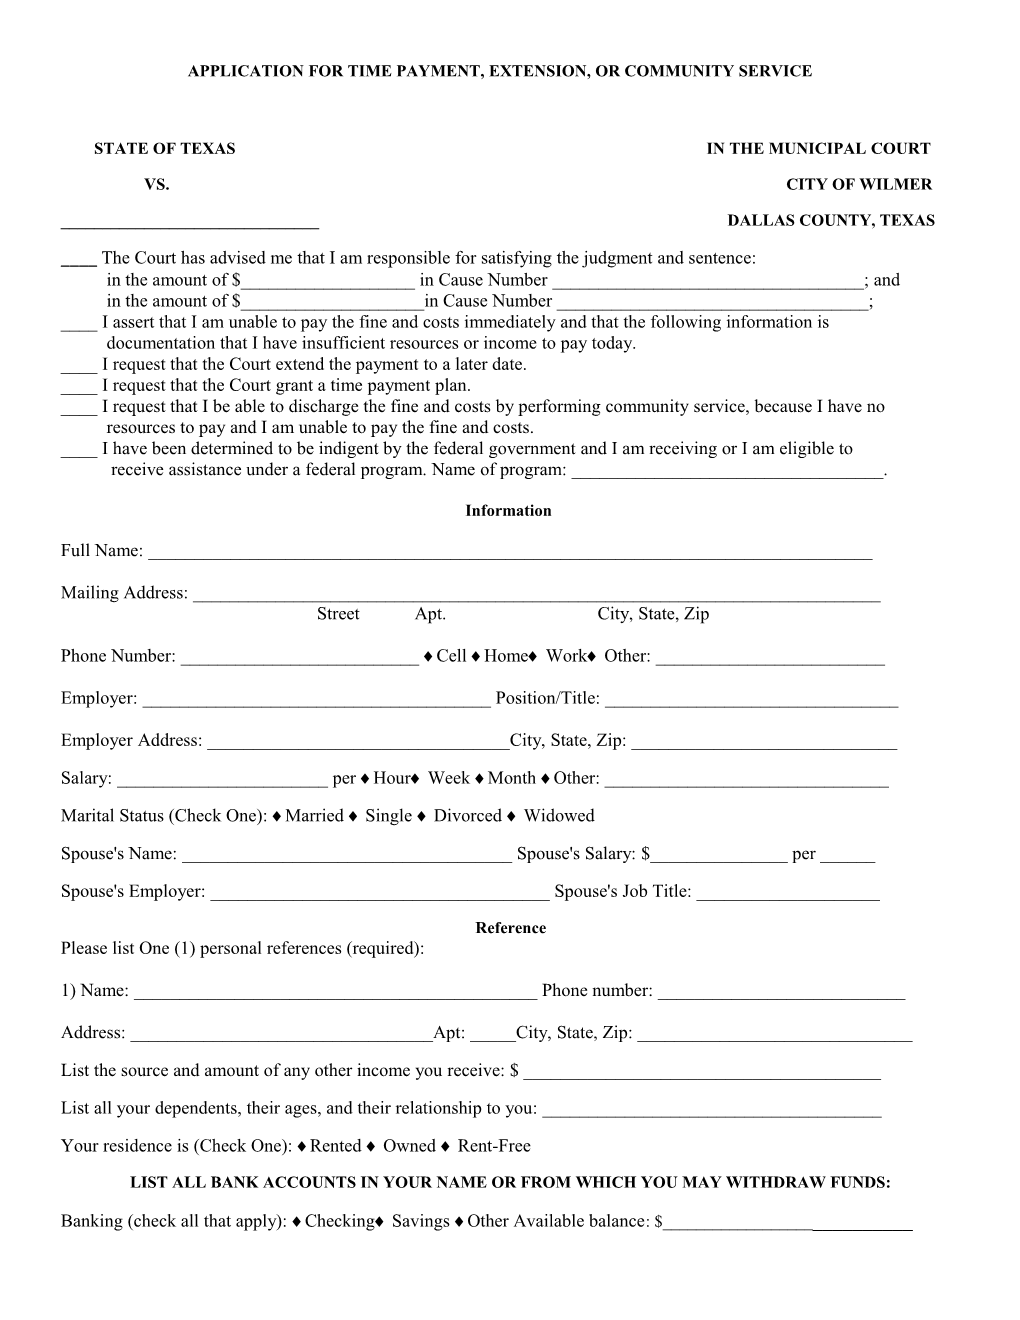 Application for Time Payment, Extension, Or Community Service